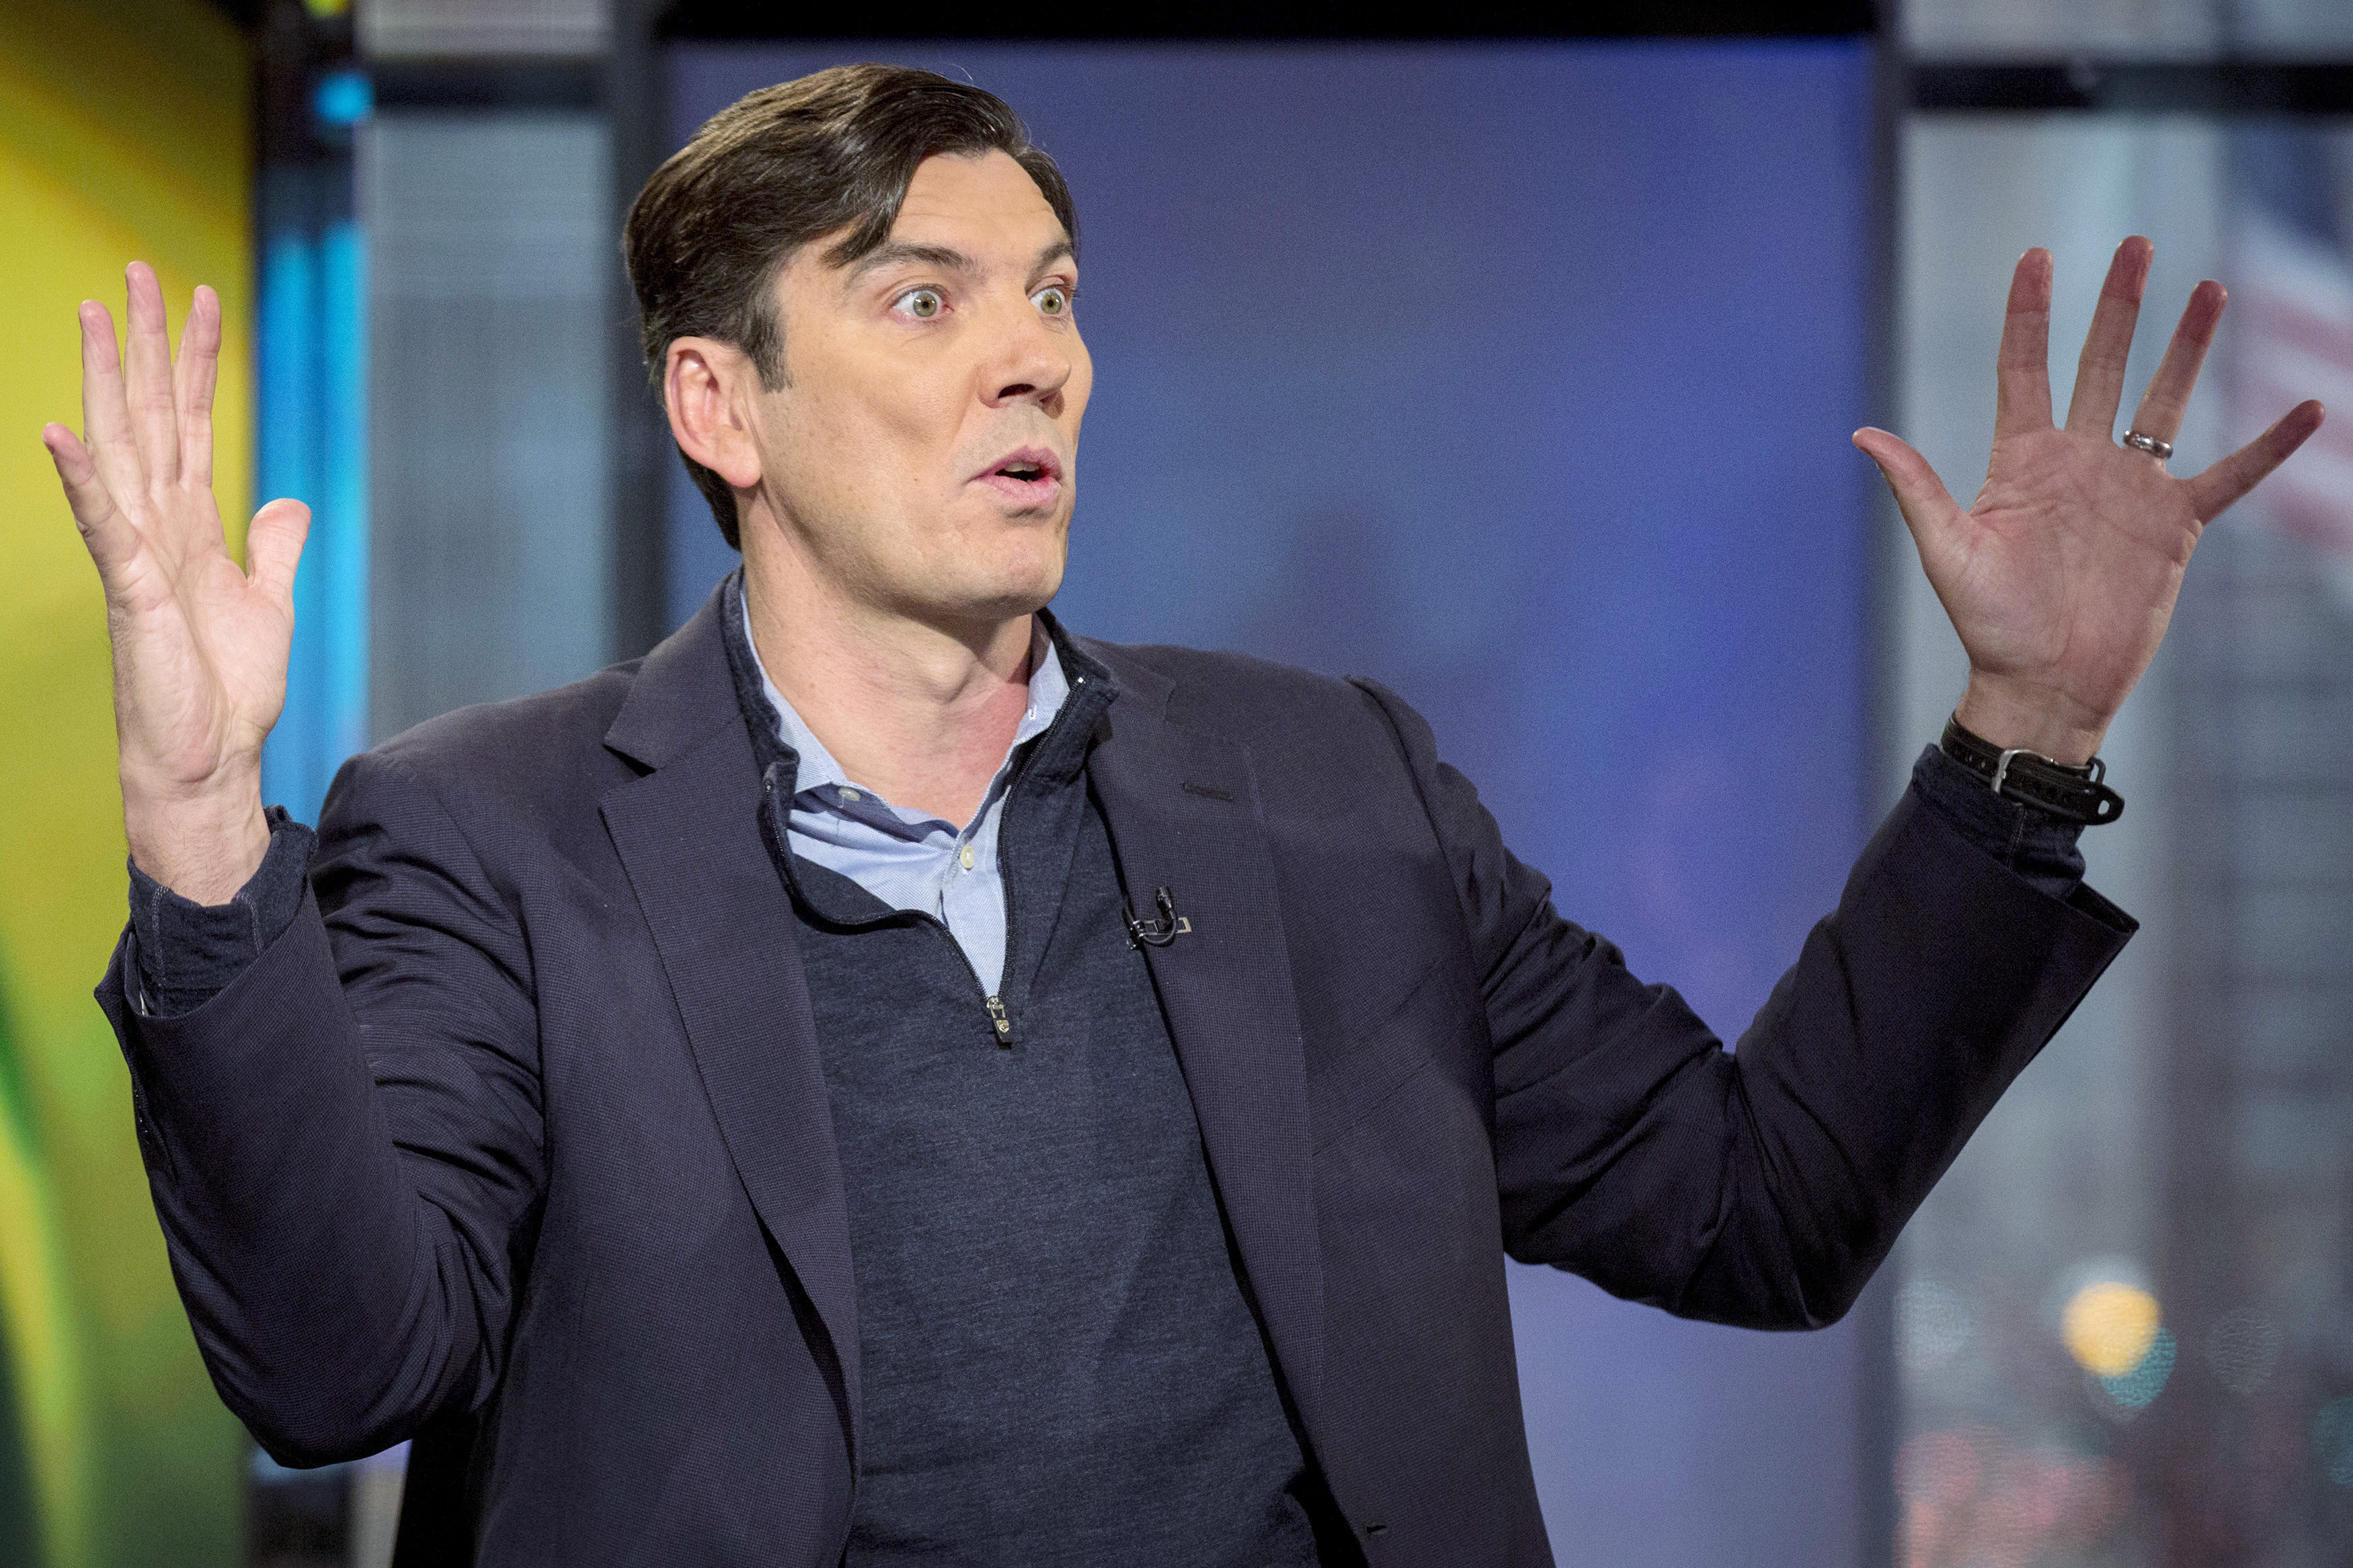 Tim Armstrong, Chairman and CEO of AOL Inc., speaks during an interview with Fox Business Channel in New York